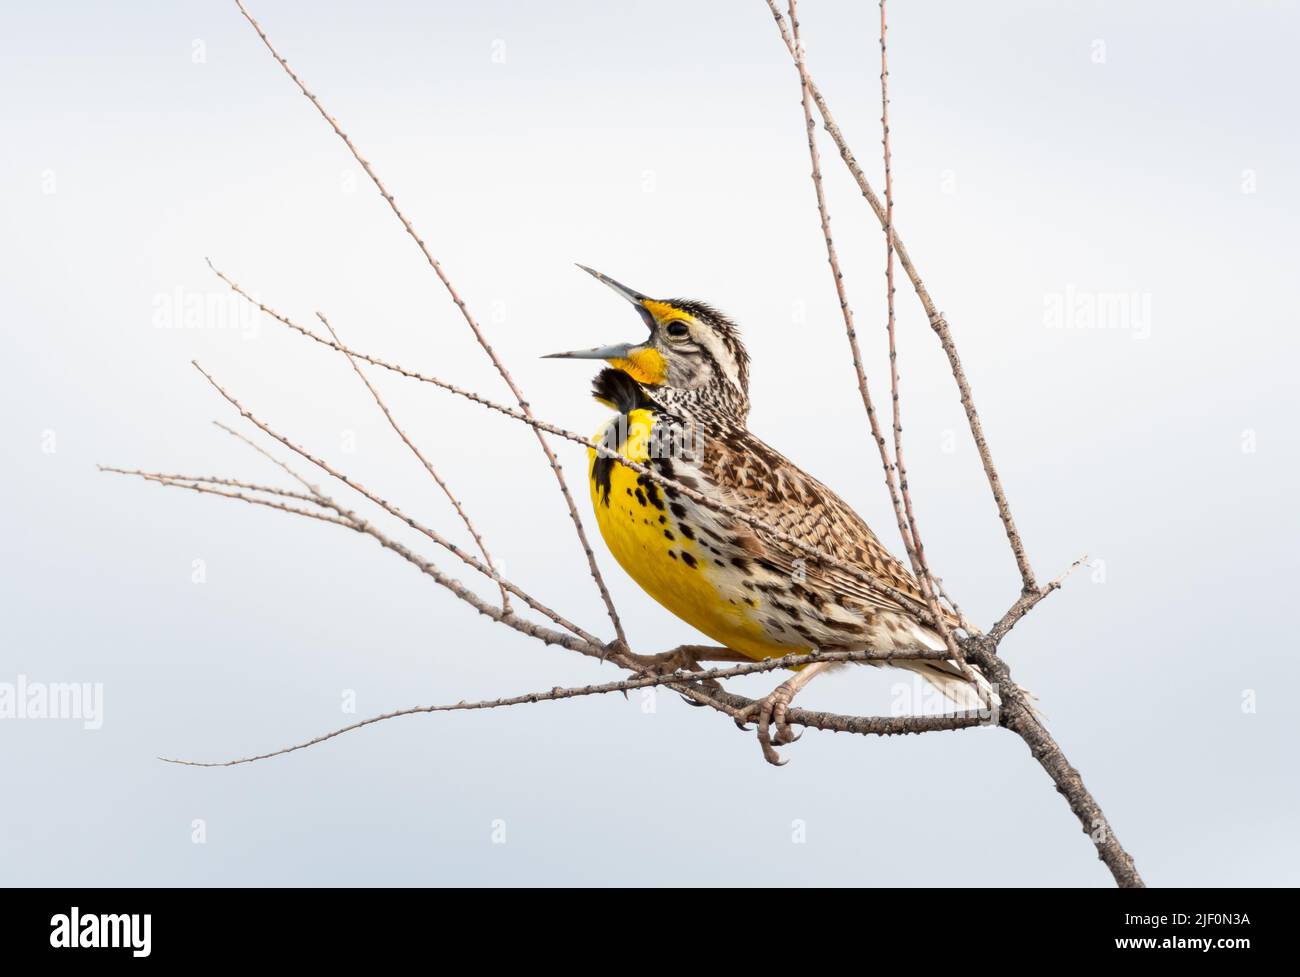 Western Meadowlark, Sturnella neglecta, chirping and singing in dry branches. Stock Photo